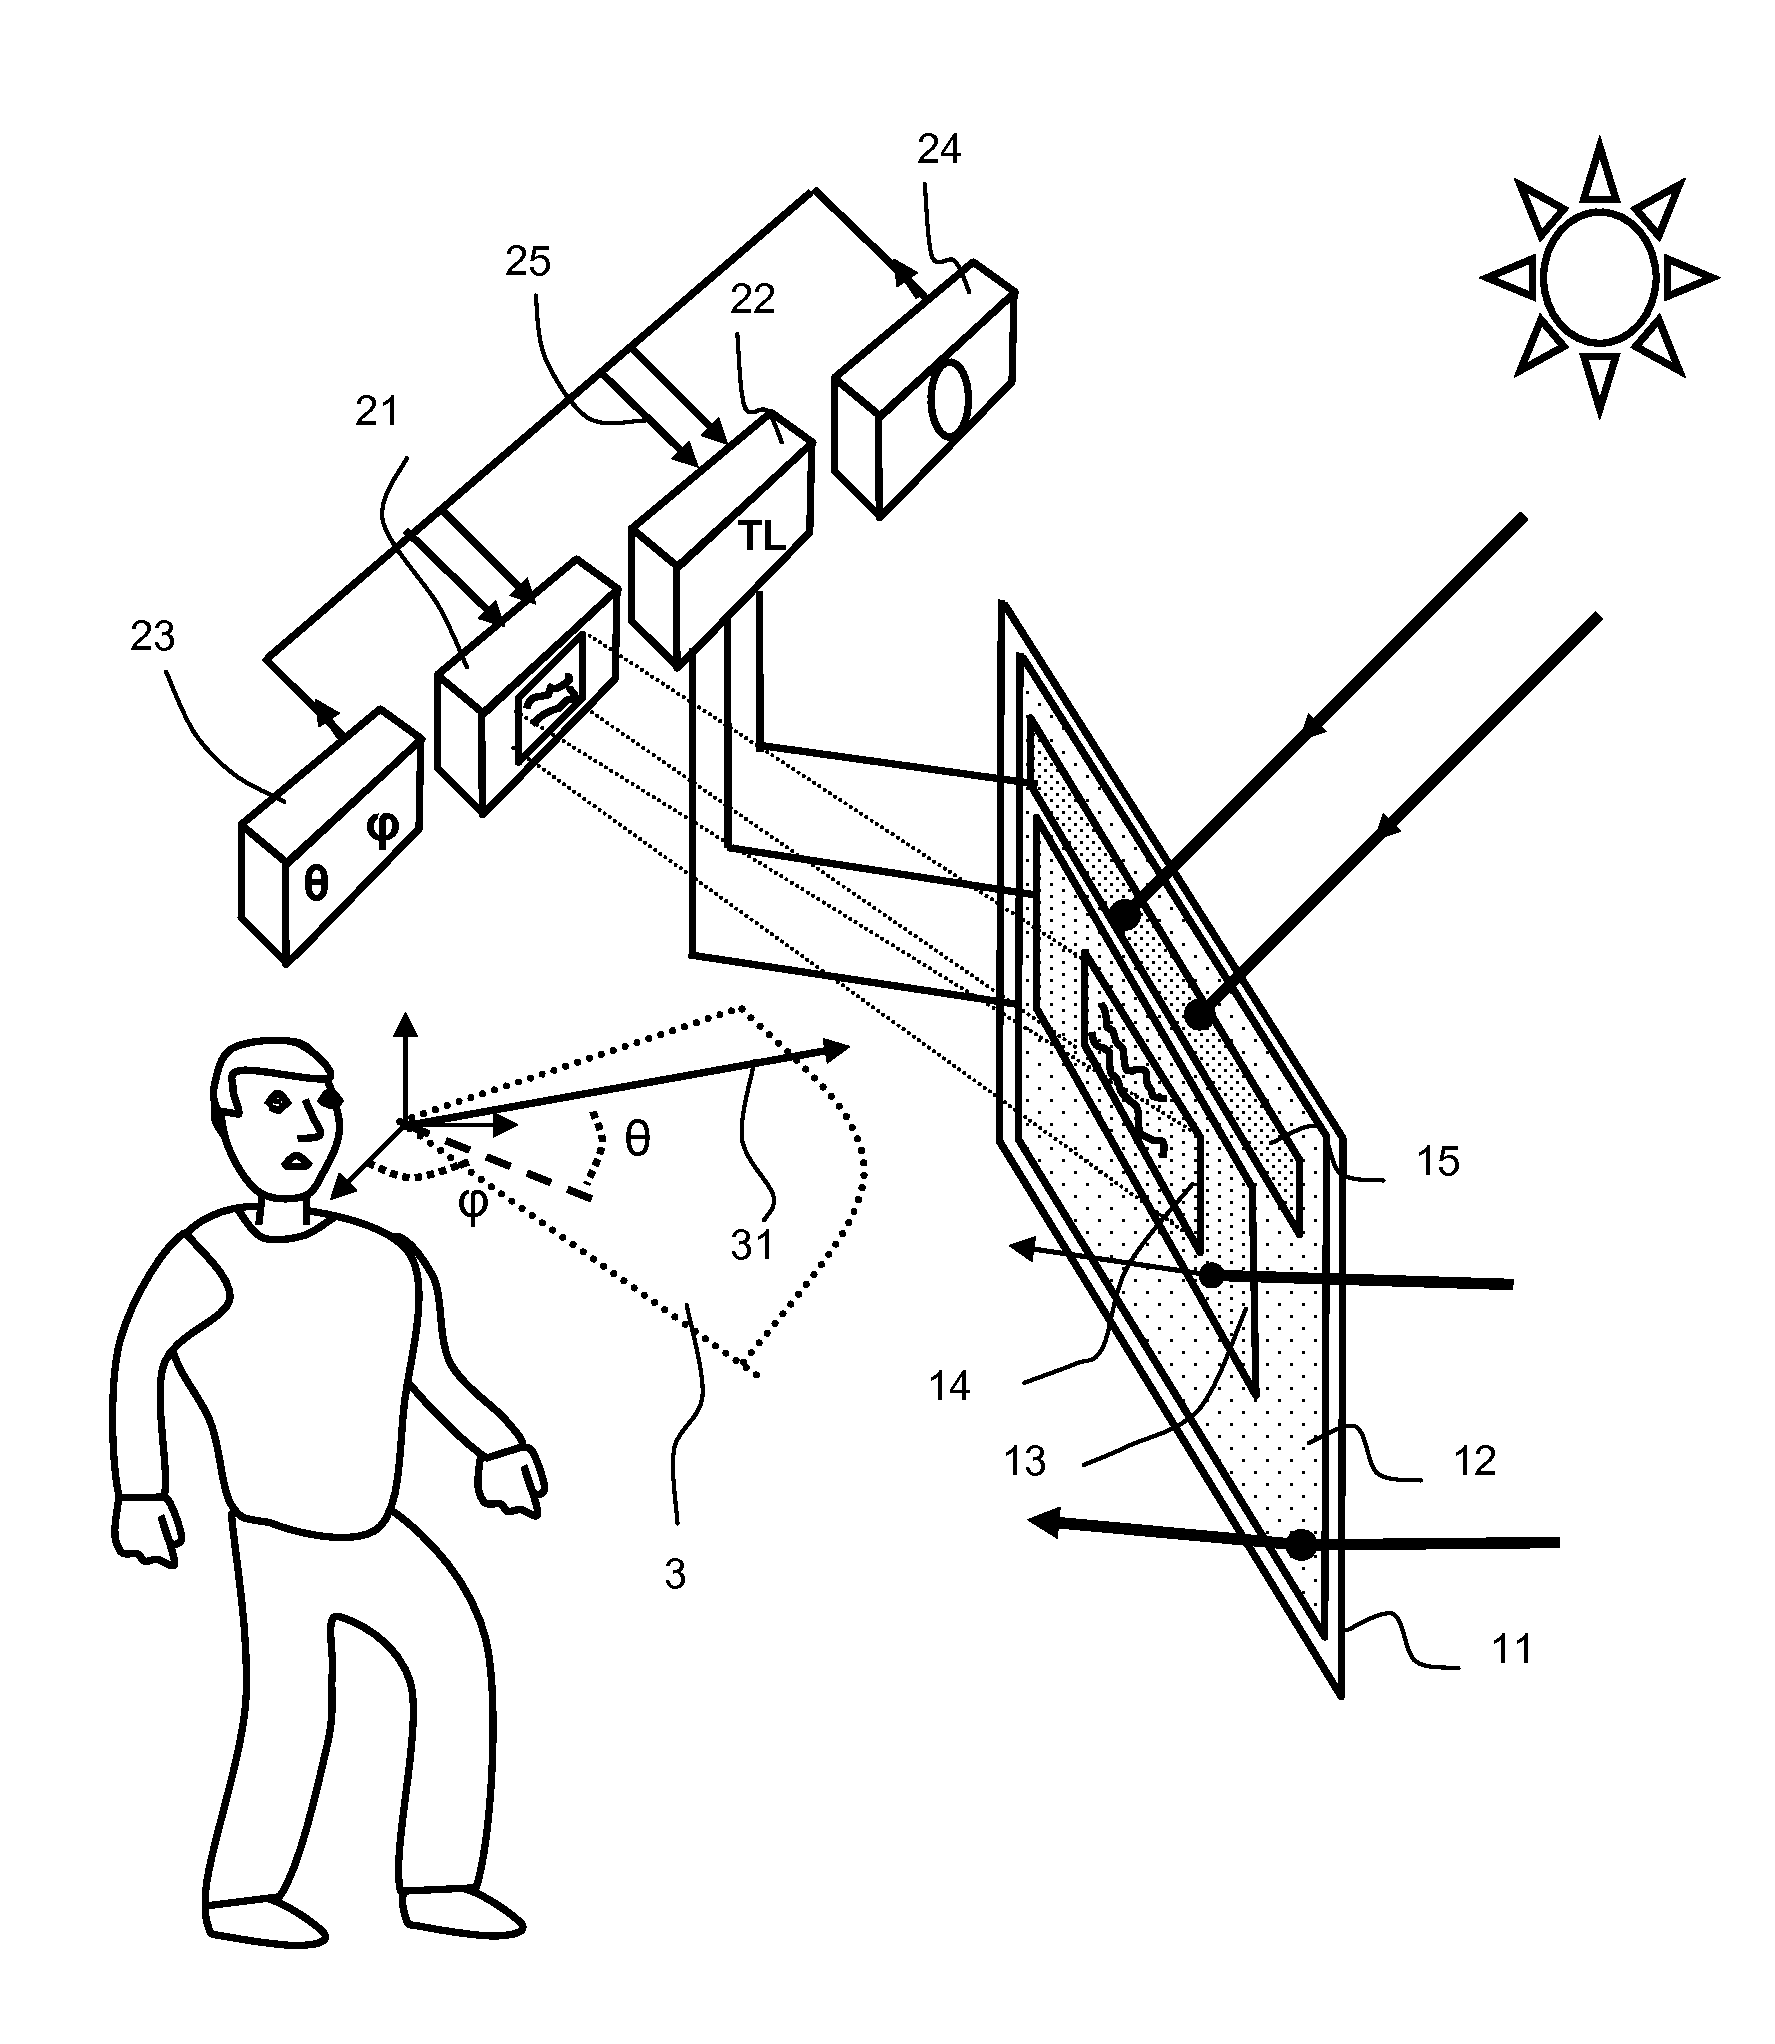 Vision Equipment Comprising an Optical Strip with a Controlled Coefficient of Light Transmission